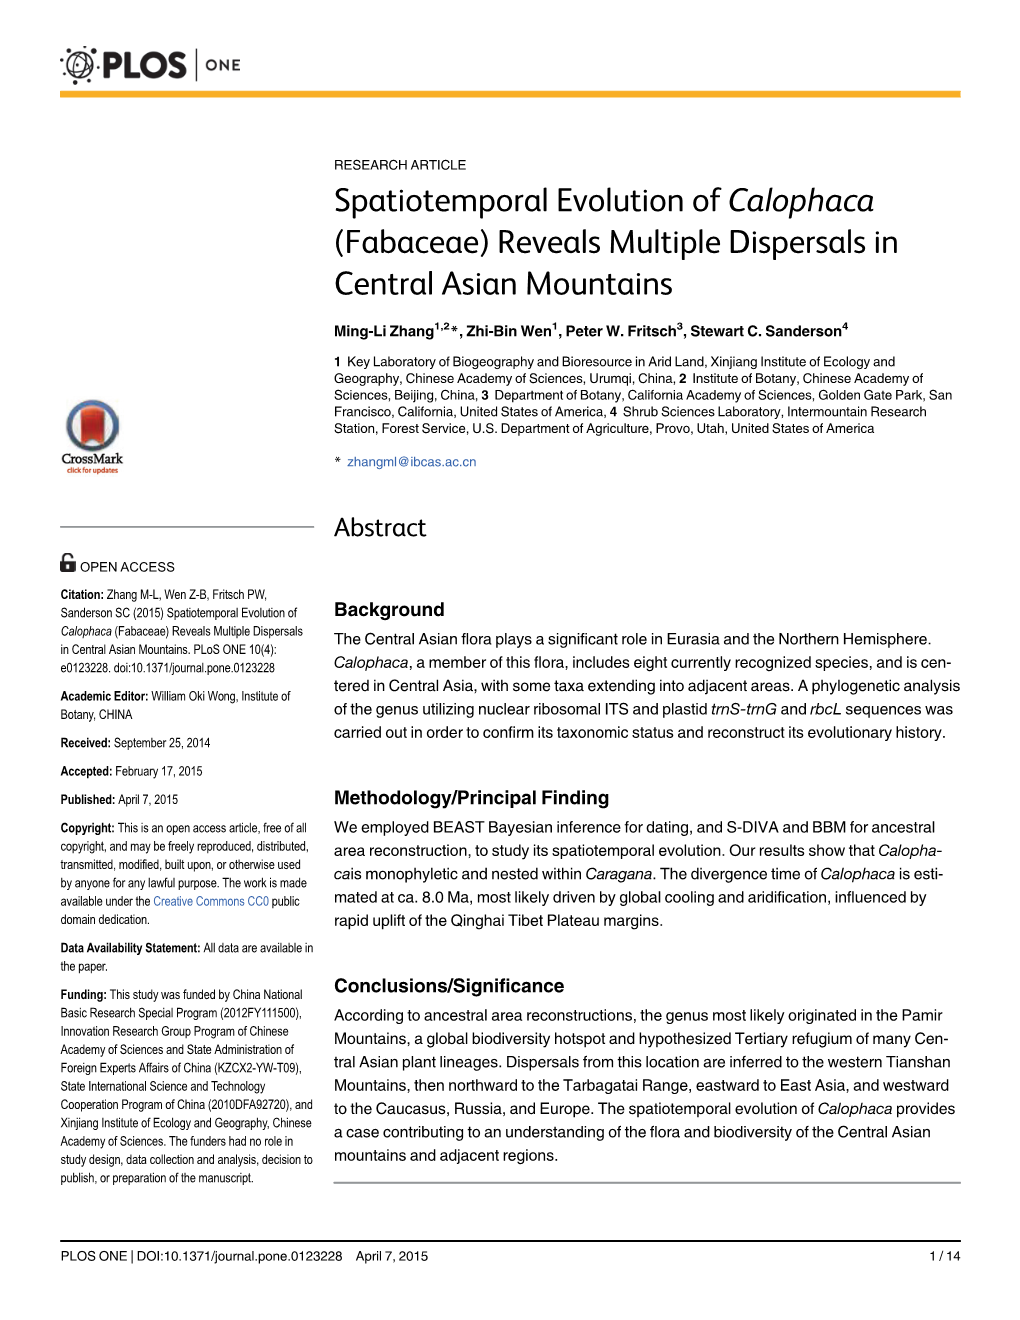 Spatiotemporal Evolution of Calophaca (Fabaceae) Reveals Multiple Dispersals in Central Asian Mountains